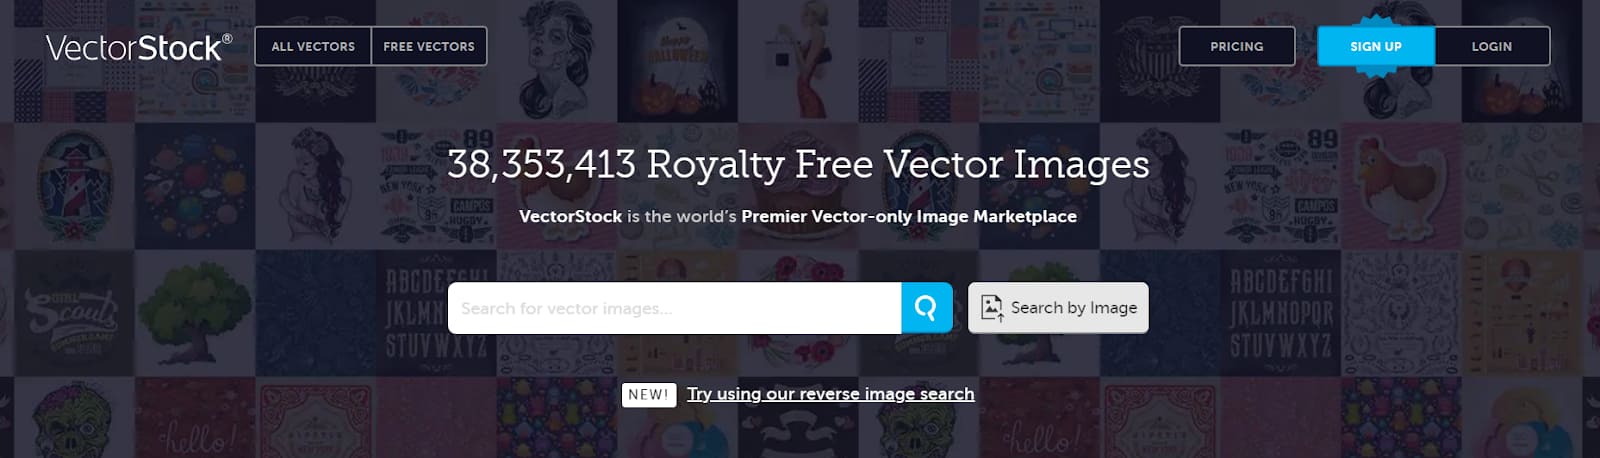 Free Vector Icons and Images